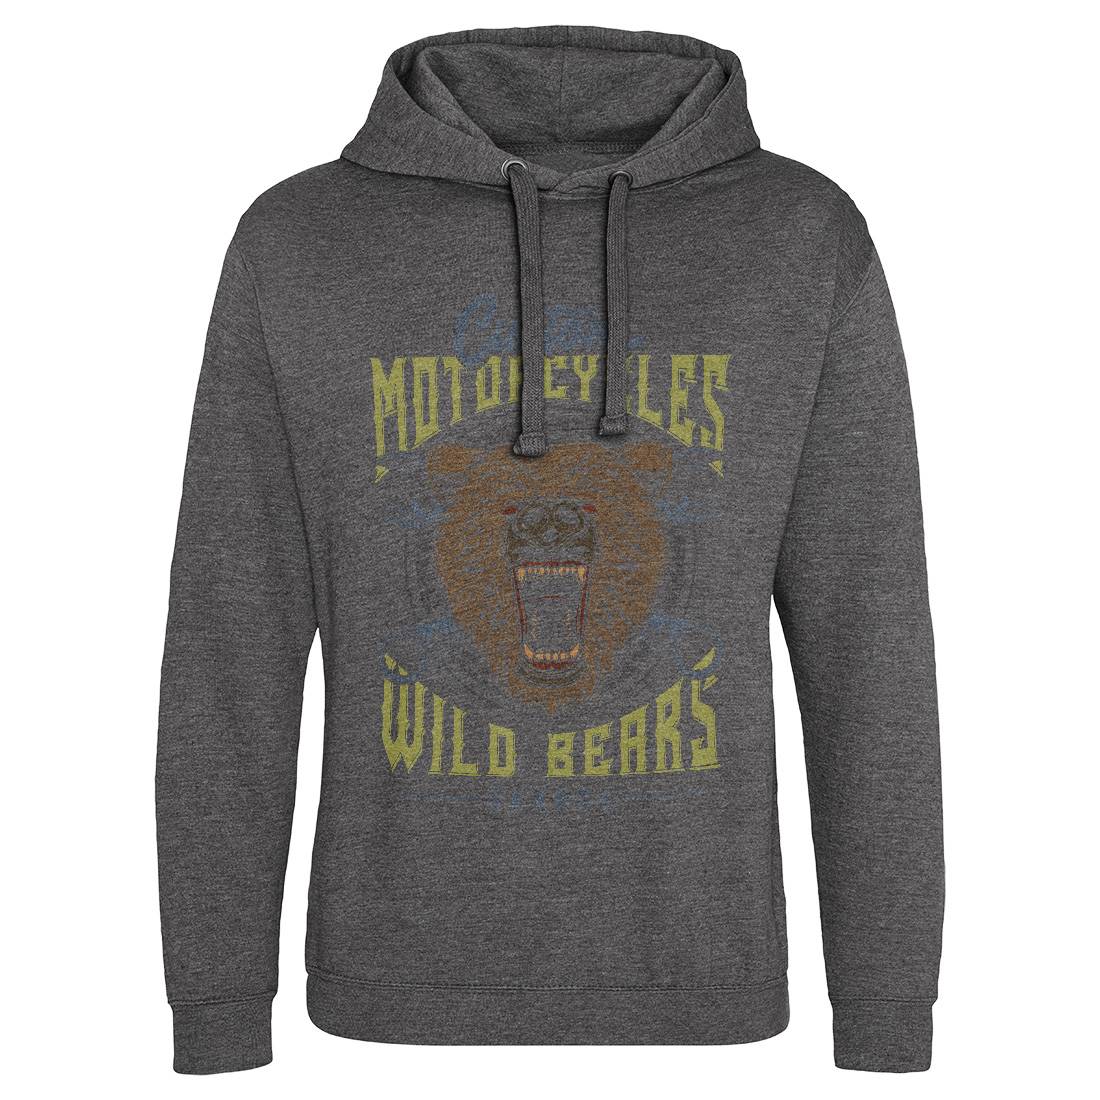 Wild Bears Mens Hoodie Without Pocket Motorcycles B788